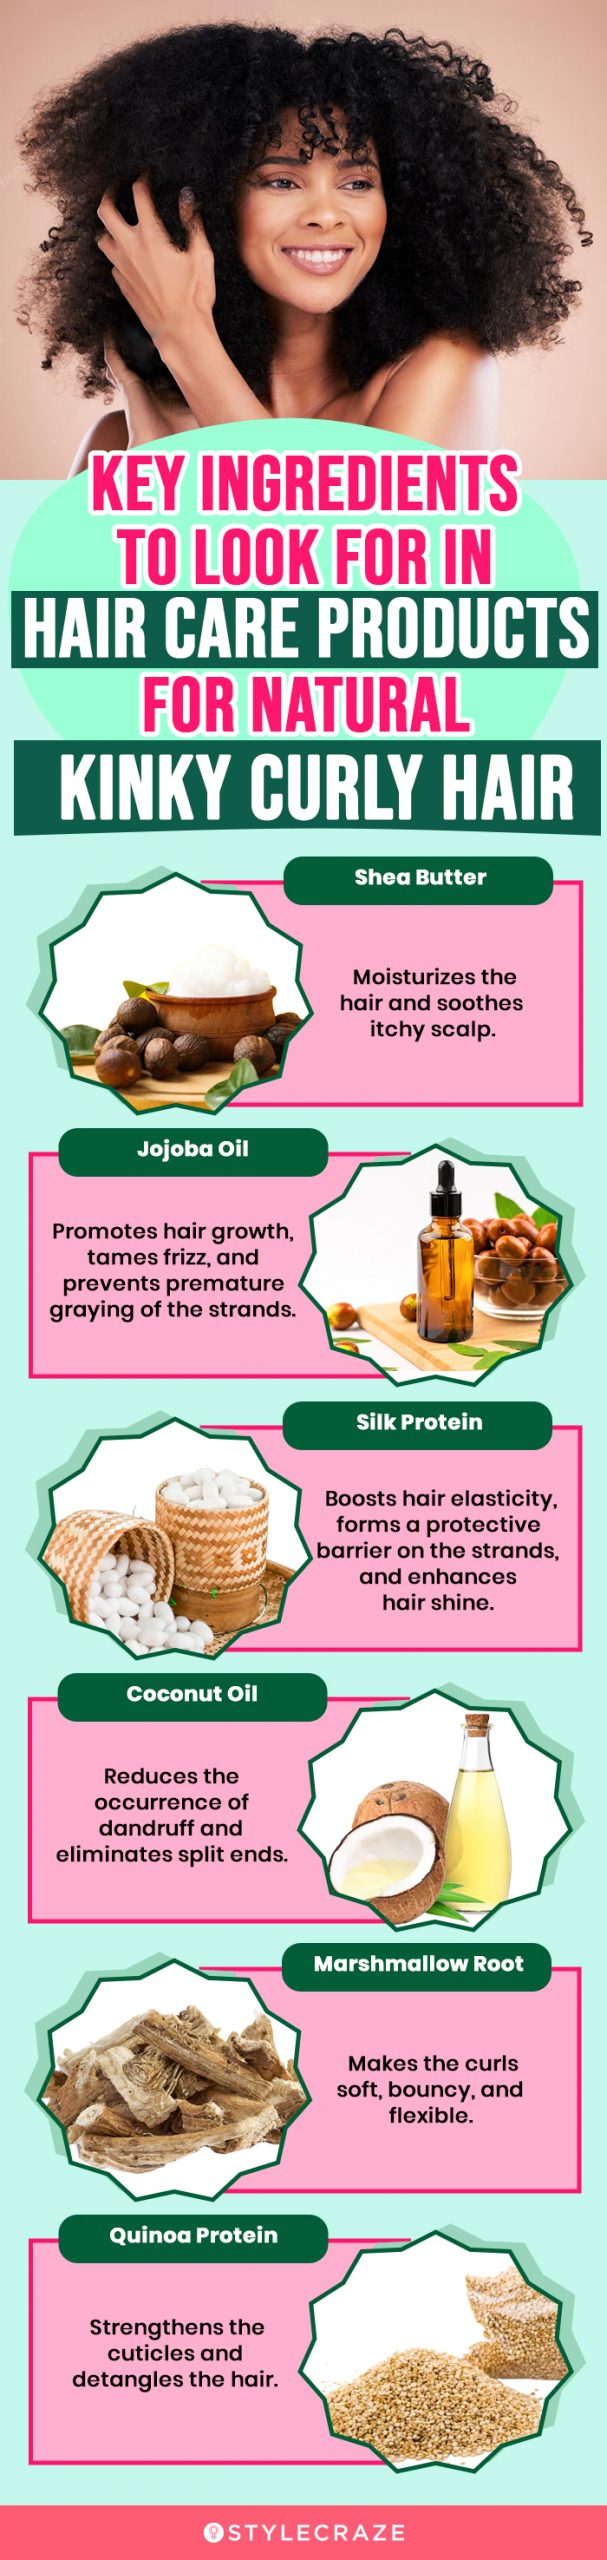 Key Ingredients To Look For In Hair Care Products For Natural Kinky Curly Hair (infographic)